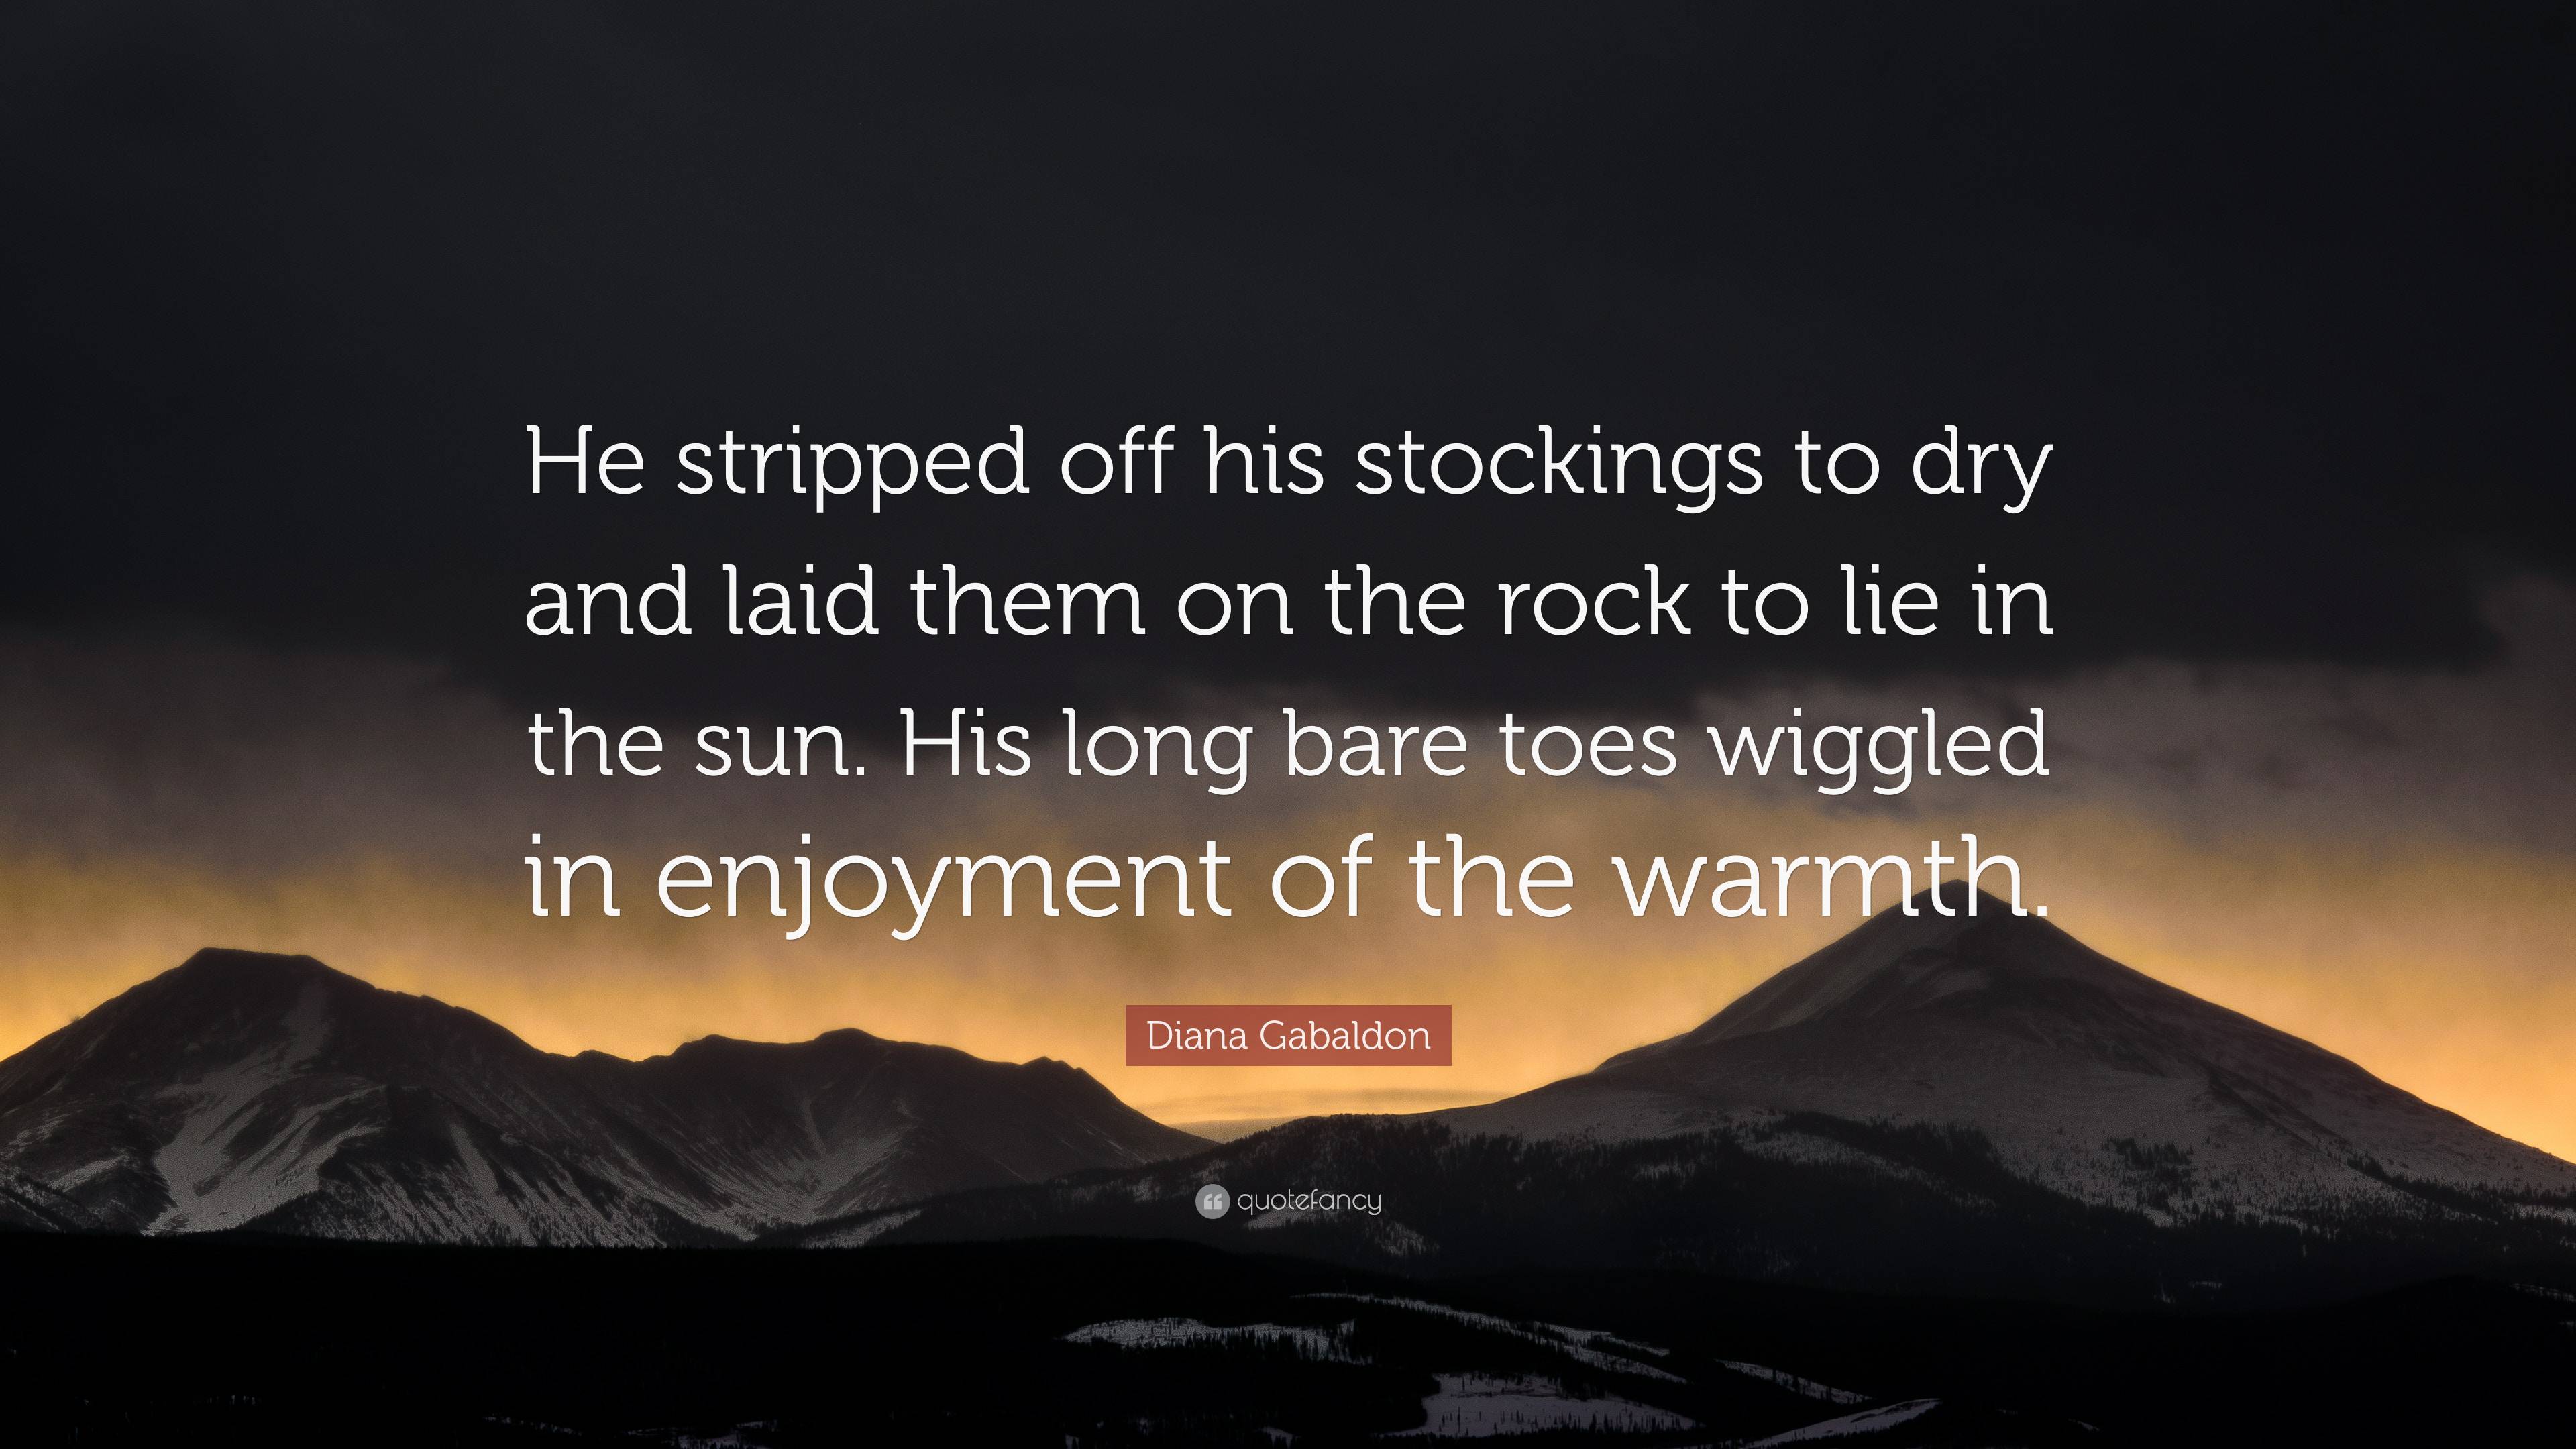 Diana Gabaldon Quote: “He stripped off his stockings to dry and laid ...